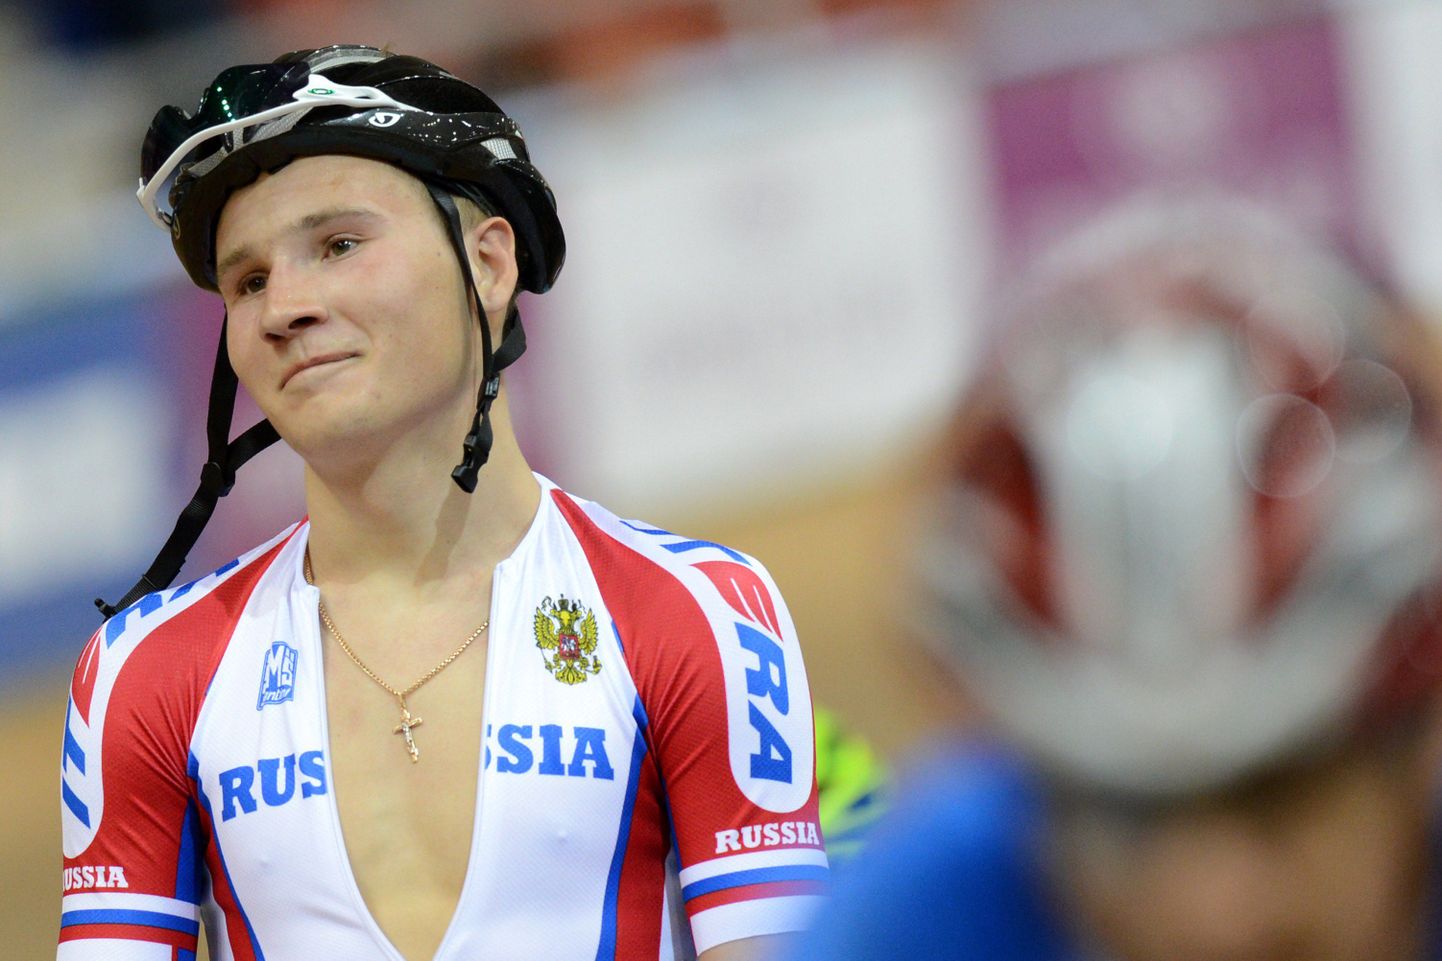 (FILES) This file picture dated on February 22, 2013 shows Russia's Kirill Sveshnikov, bronze, reacting after UCI Track Cycling World Championships Men's 40 km Point Race in Minsk. Medal-winning Russian track and road cyclist Kirill Sveshnikov has been suspended from competition and training after testing positive for a banned substance, the Russian anti-doping agency RUSADA said on March 5, 2014.AFP PHOTO/KIRILL KUDRYAVTSEV